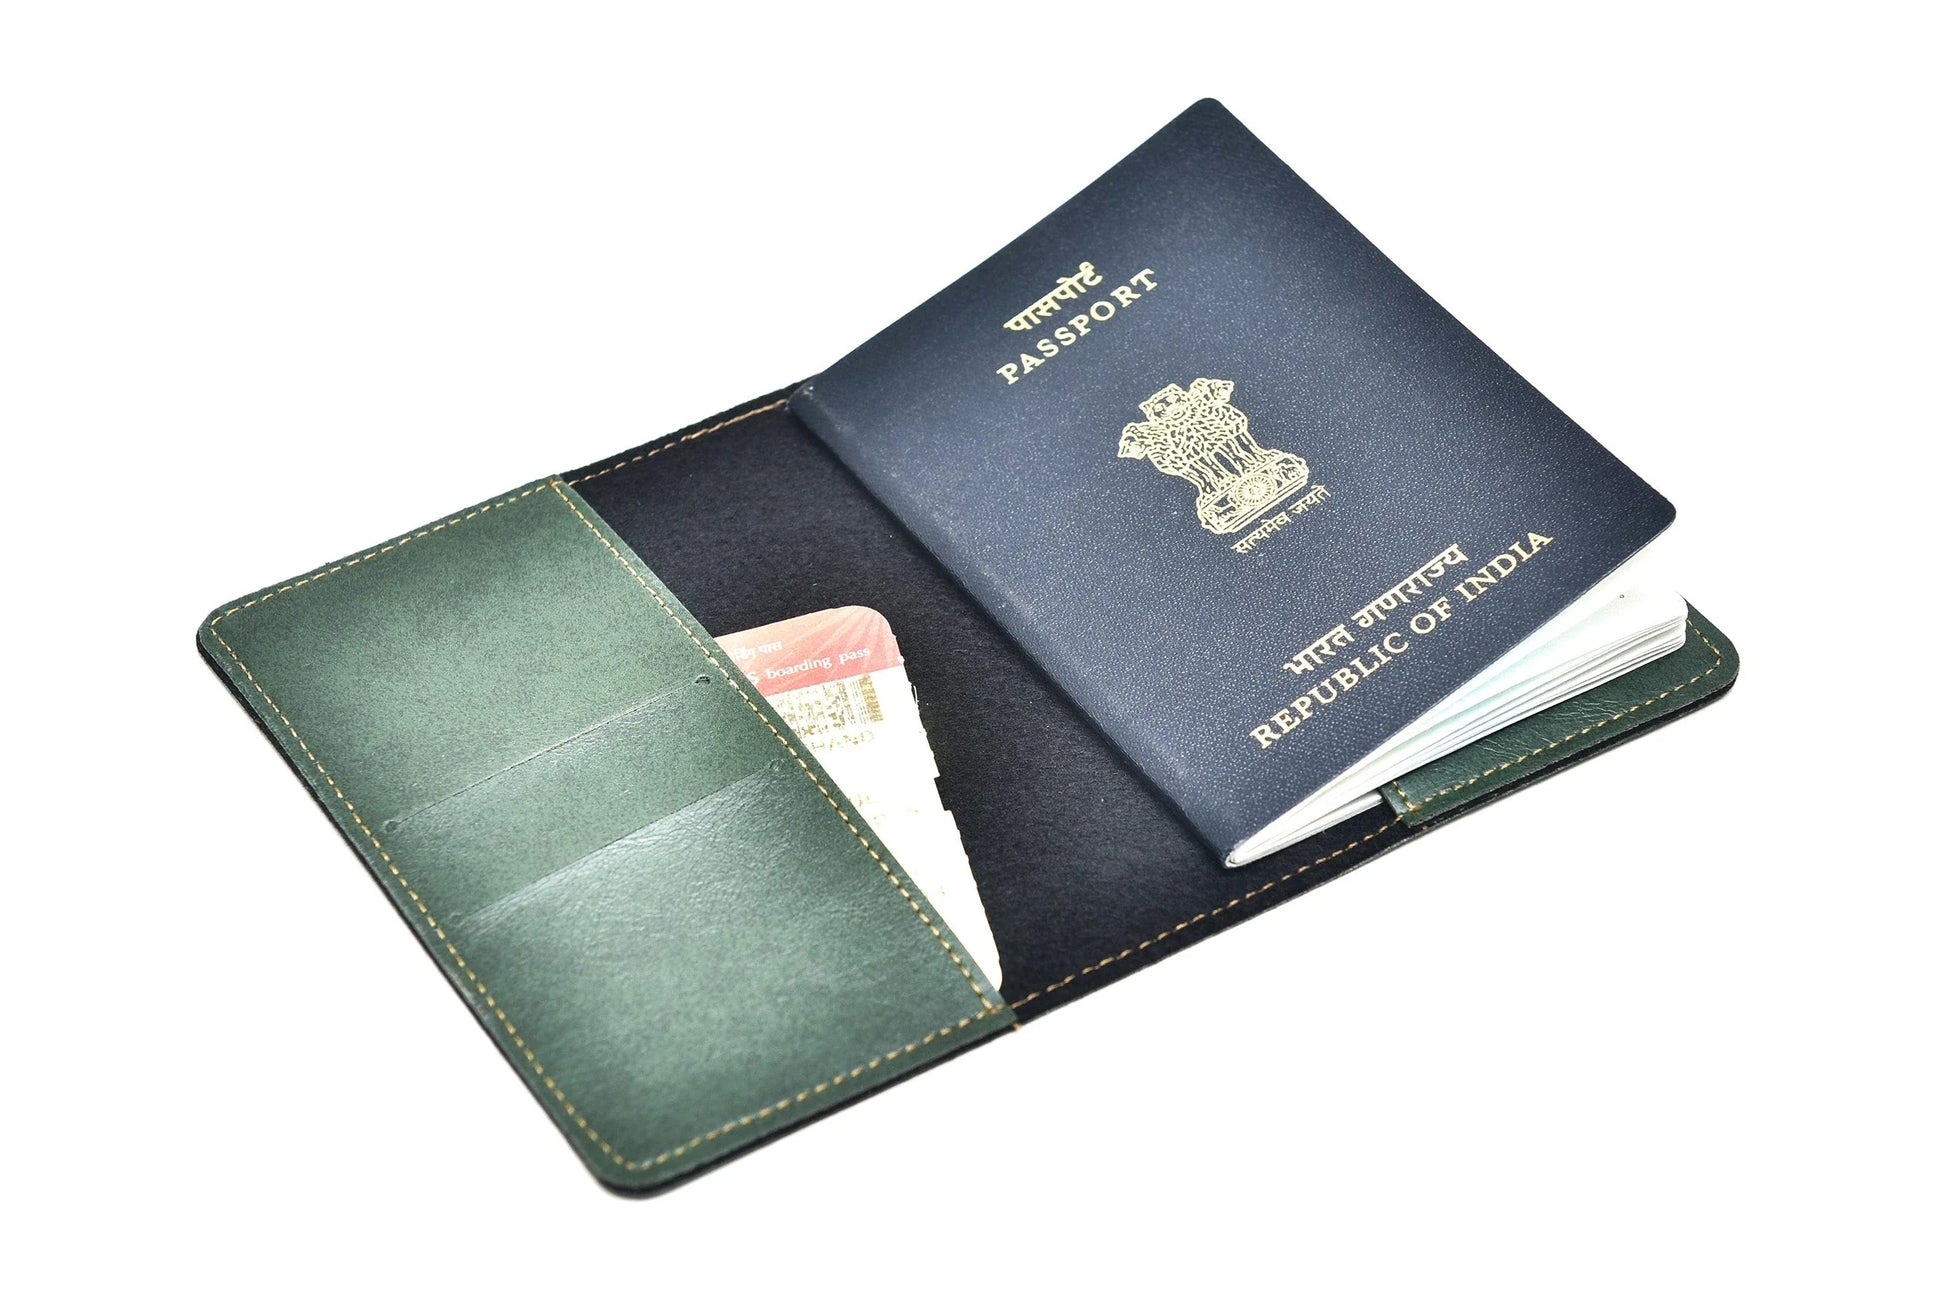 Inside or open view of green passport case for twinning